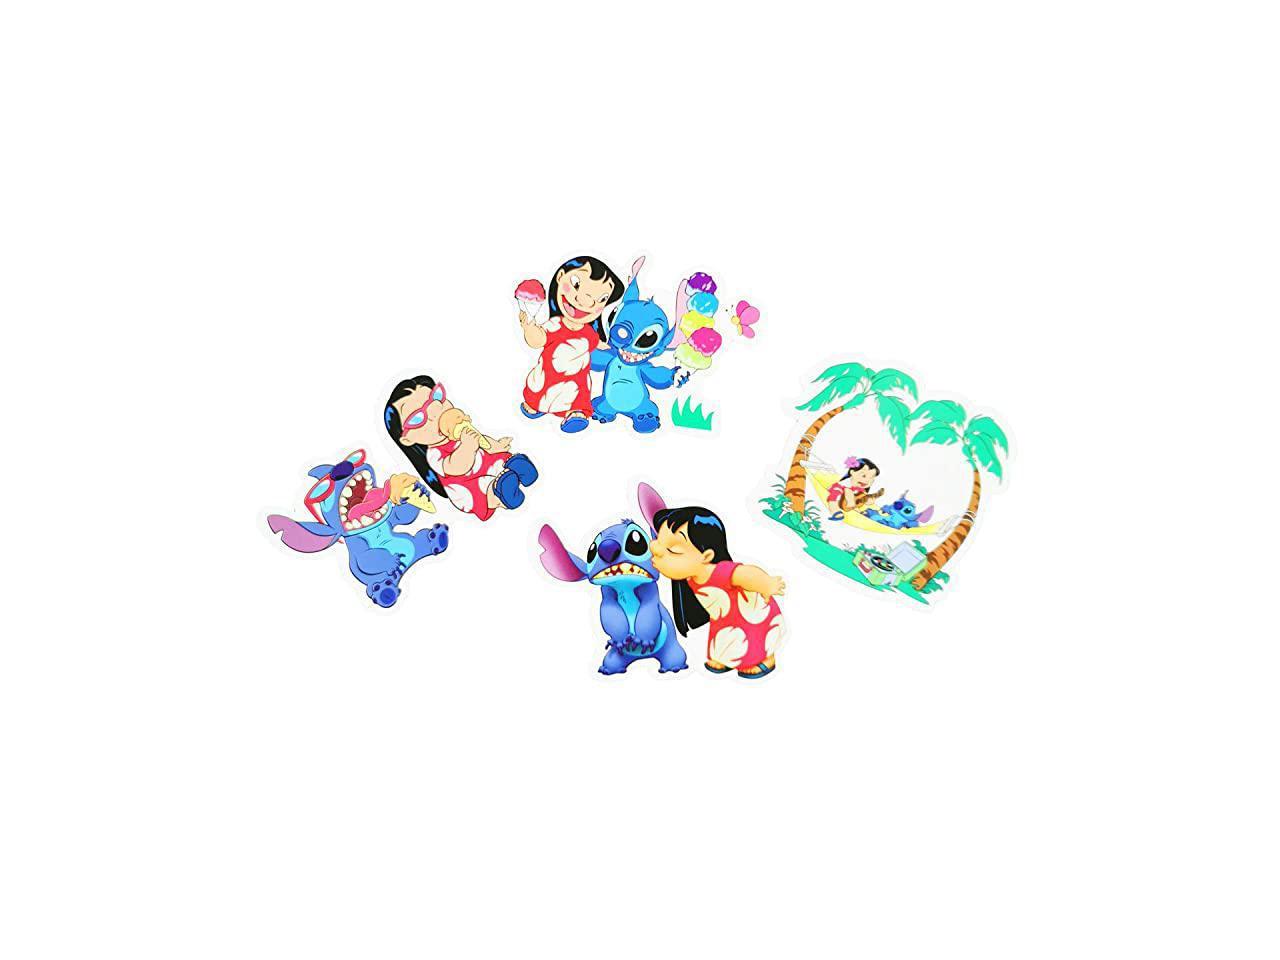 55pcs Waterproof Vinyl for Waterbottle Laptop Luggage Car Motorcycle Bicycle Fridge DIY Styling Vinyl Home Lilo & Stitch Caroon Stickers